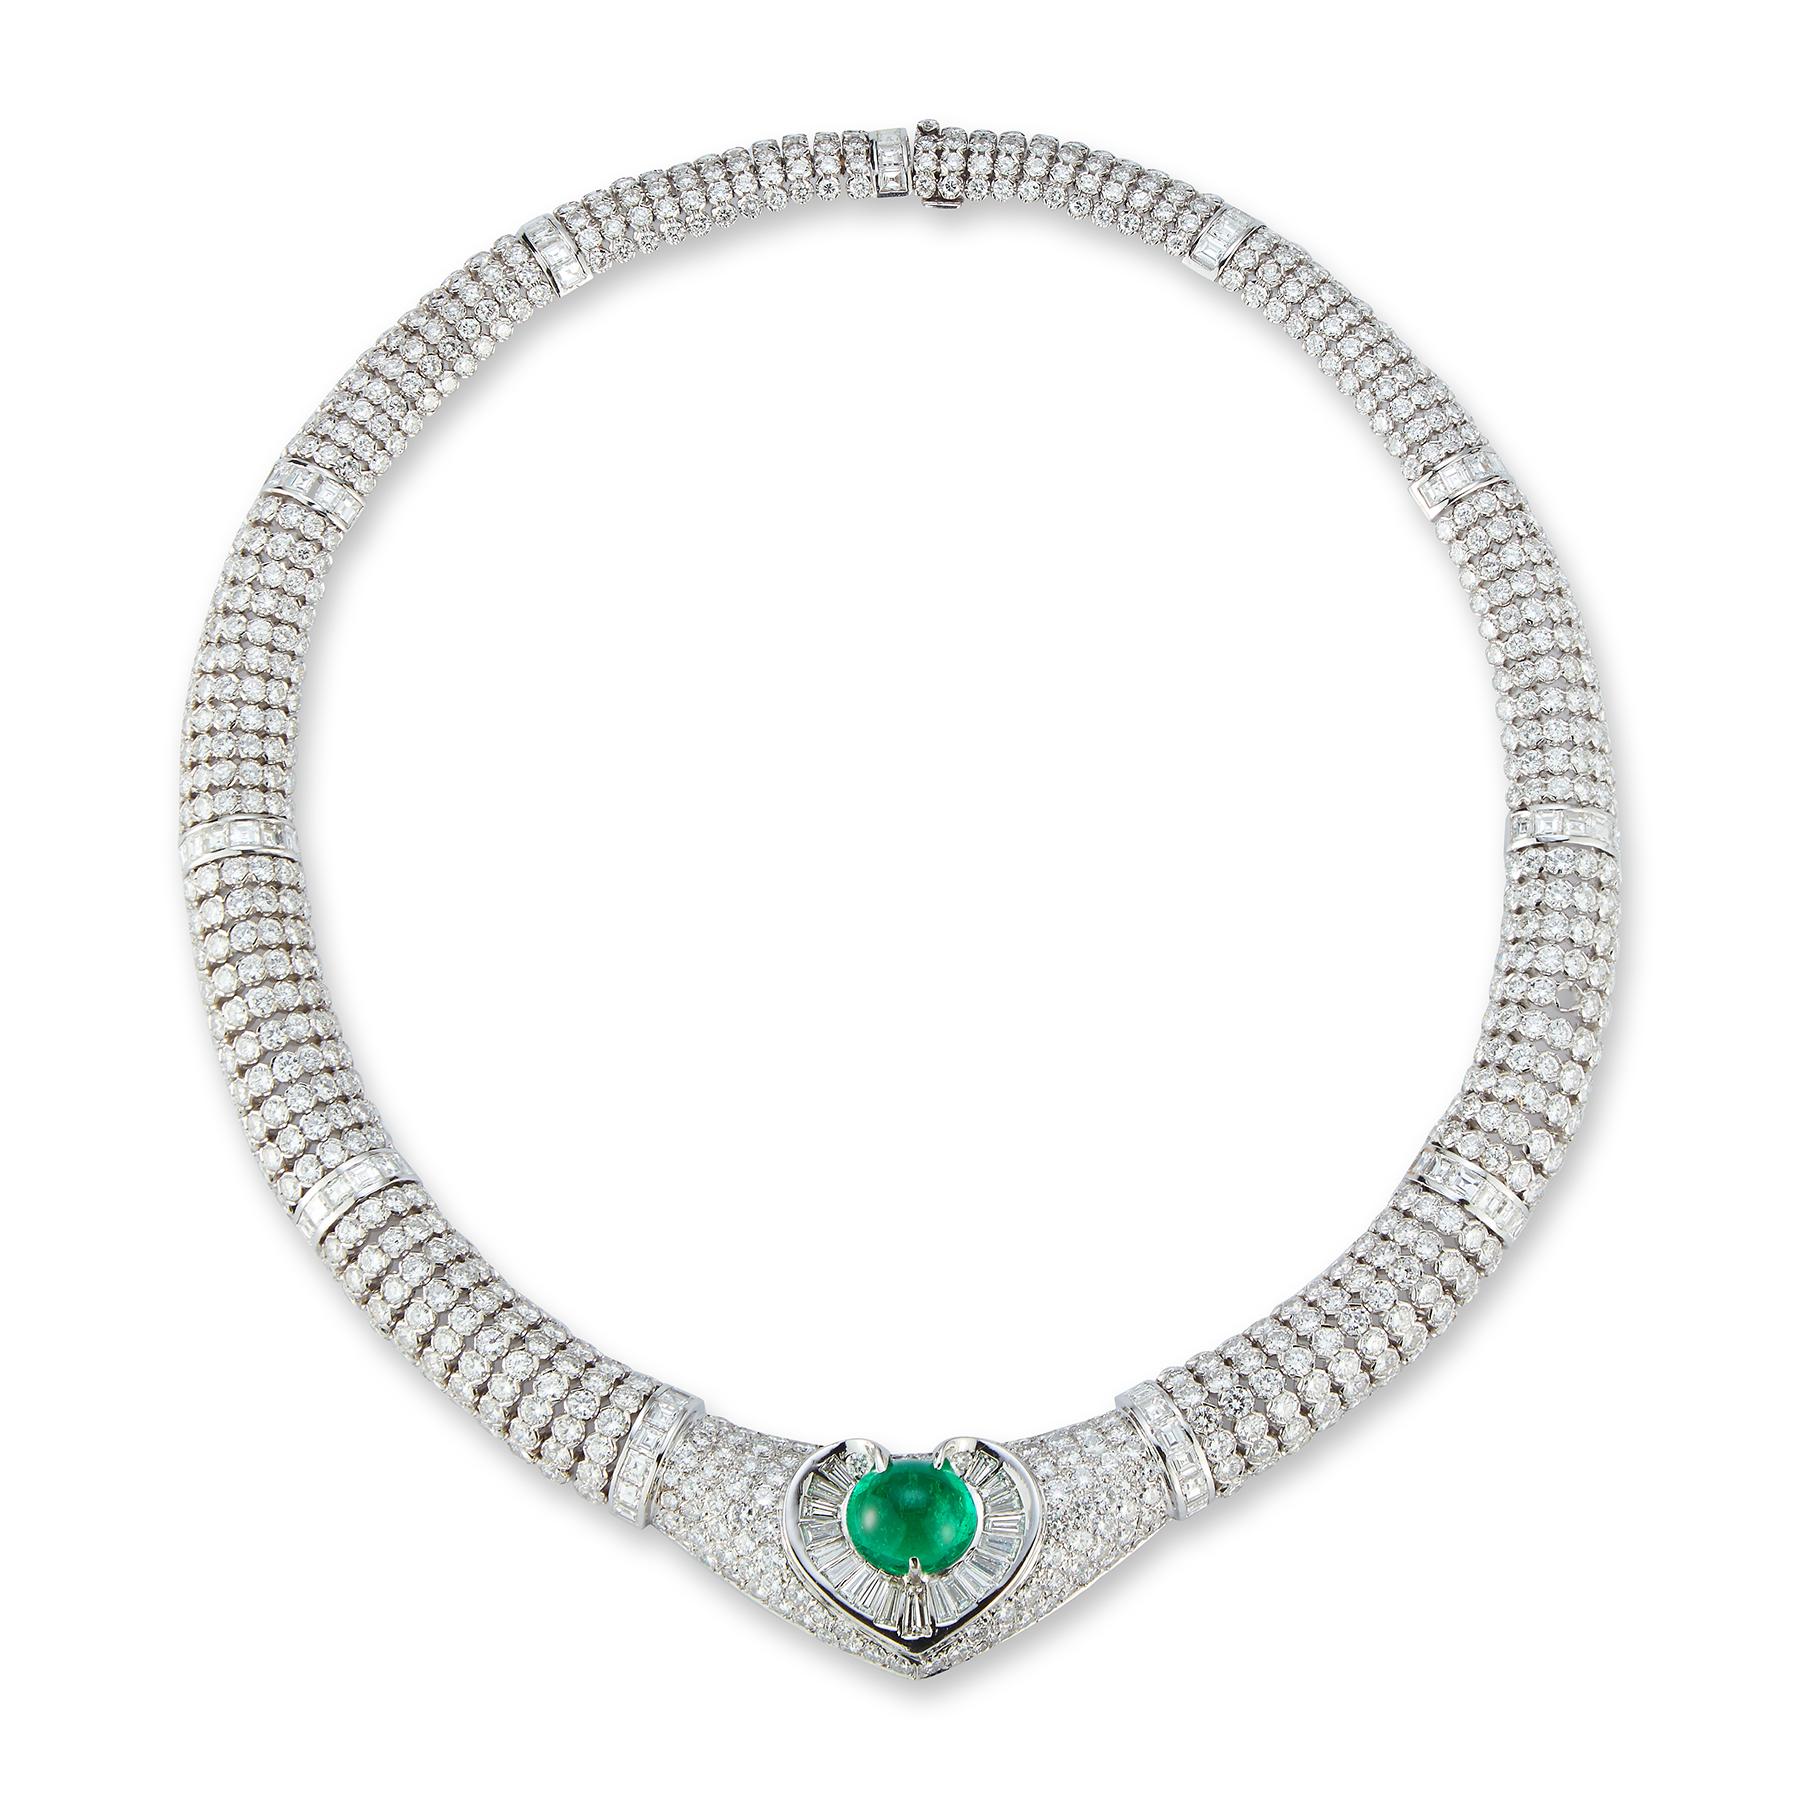 Certified Colombian Cabochon Emerald & Diamond Heart Shape Necklace 

1 cabochon emerald set in the center surrounded by baguette & round cut diamonds
840 round cut diamonds and 87 baguette cut diamonds weigh approximately 60 carats
Measurements: